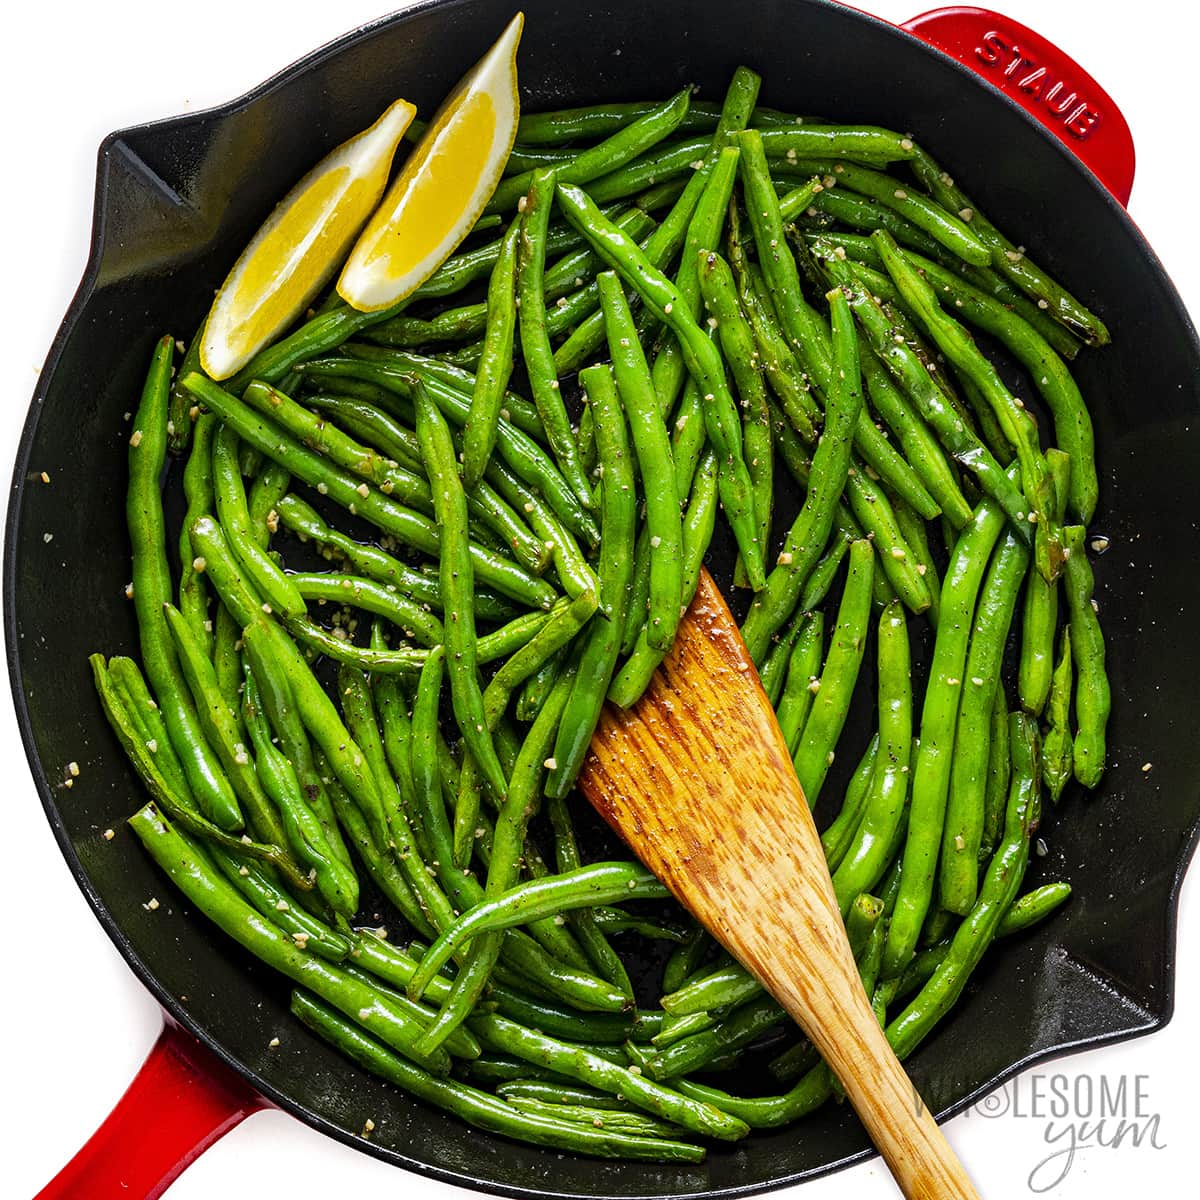 Add the lemon slices to the skillet and sauté the green beans.